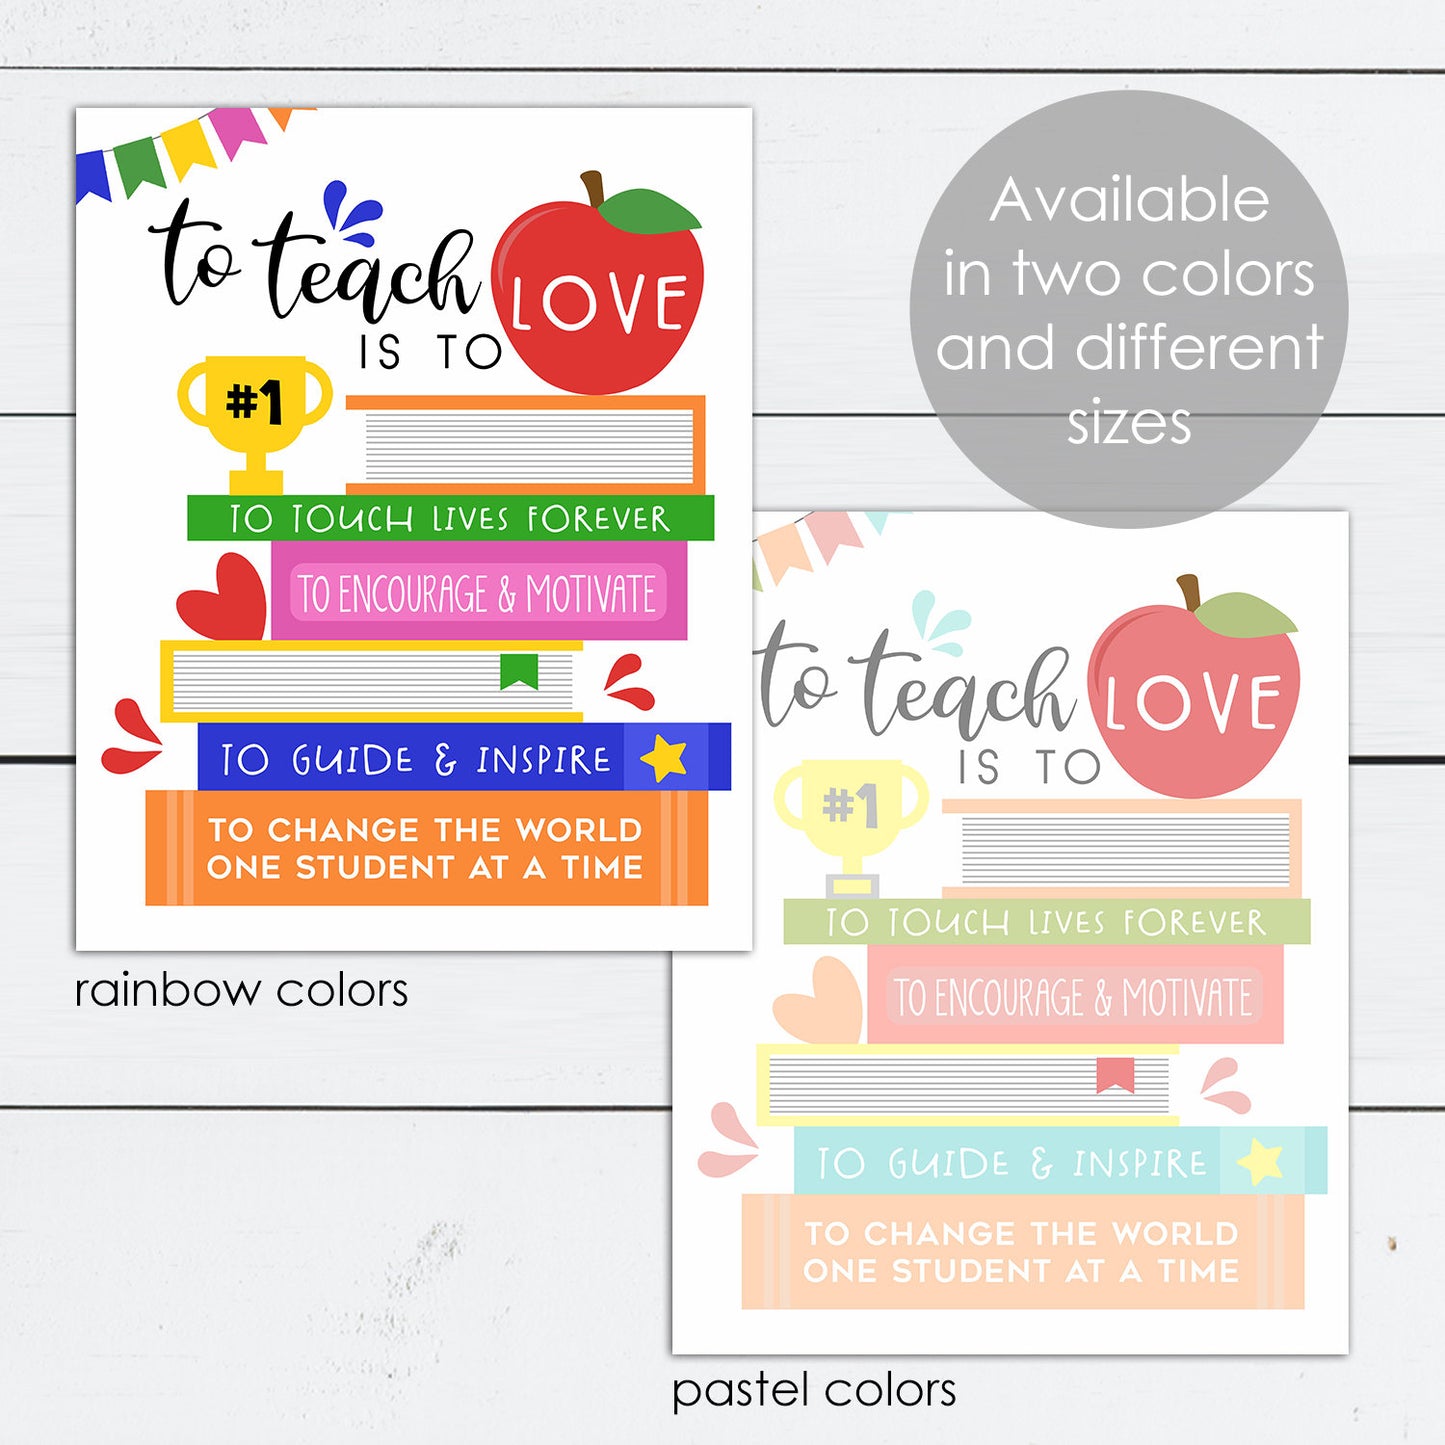 Teacher Art Print, Teacher Art, Teacher Appreciation, Books Art, To Teach is to Love, Student Gift, Gifts for School, Classroom Wall Decor